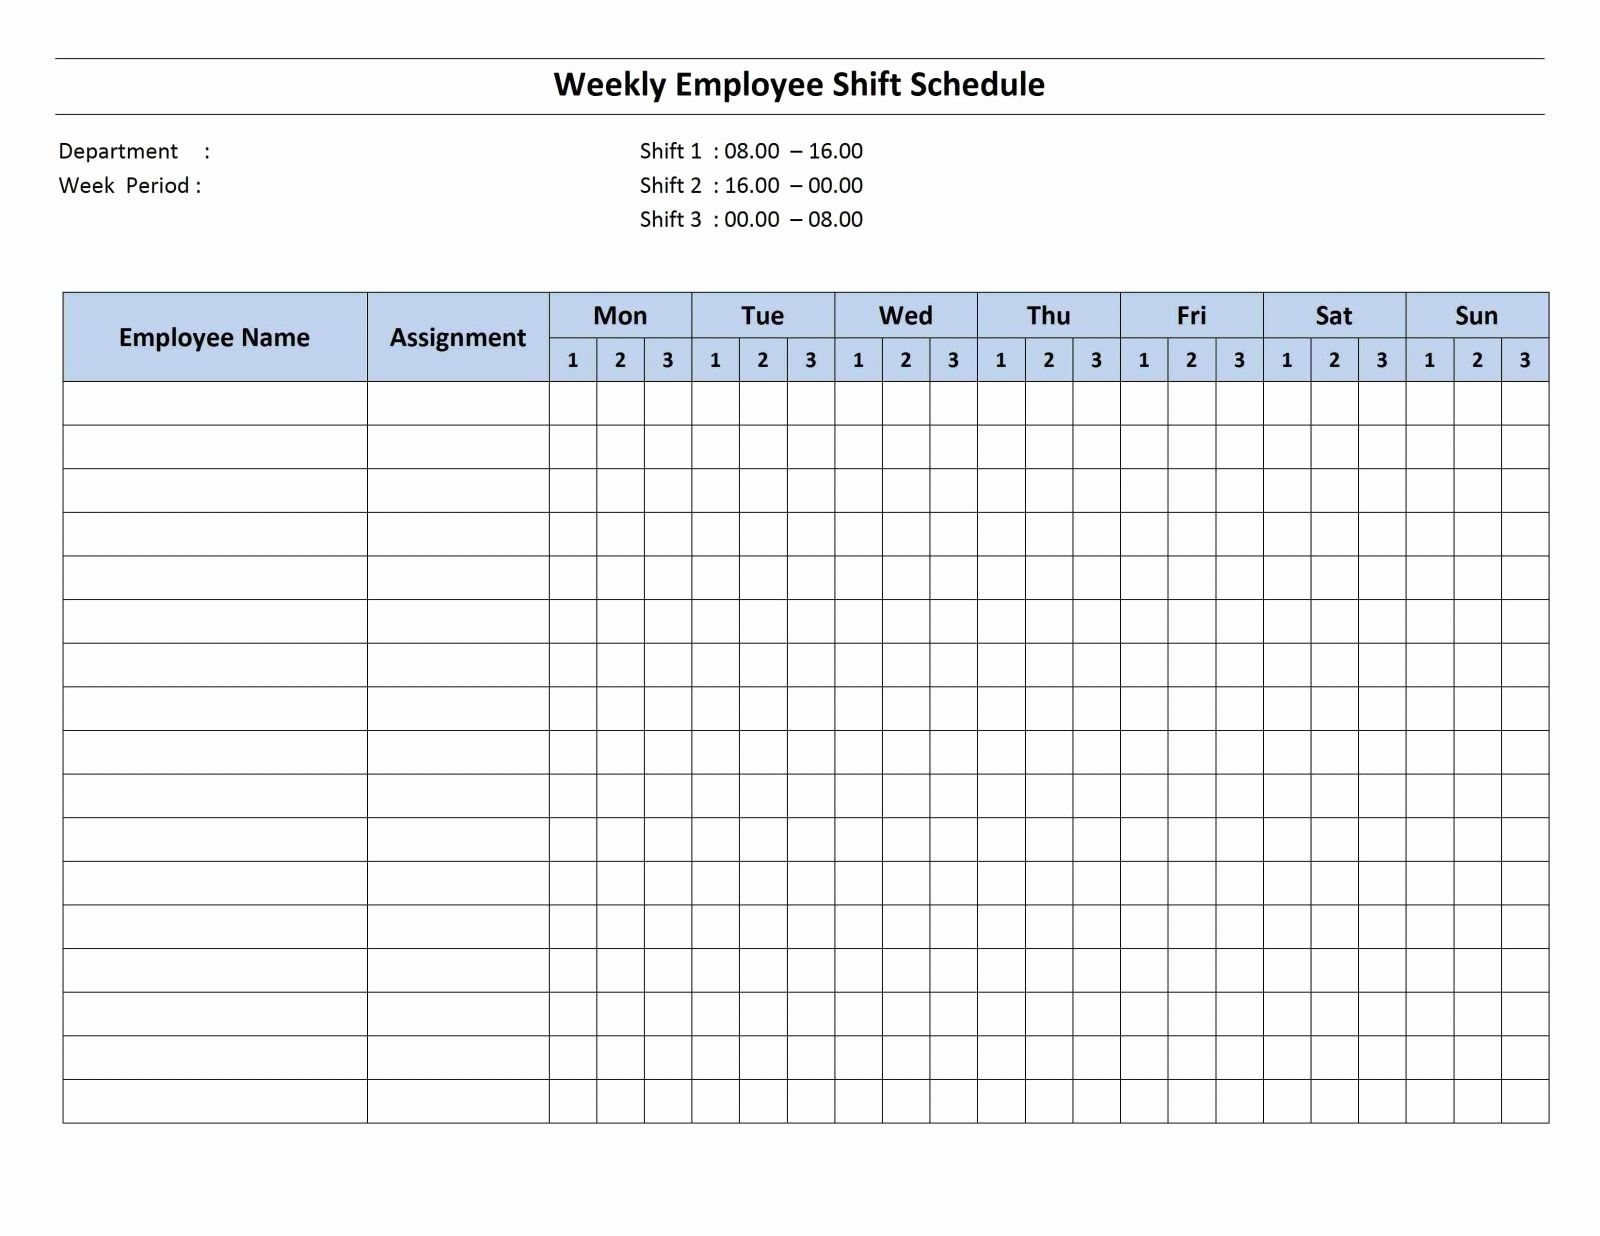 Monthly On Call Schedule Template Fresh Free Weekly Schedule Templates for Excel 18 Muygeek